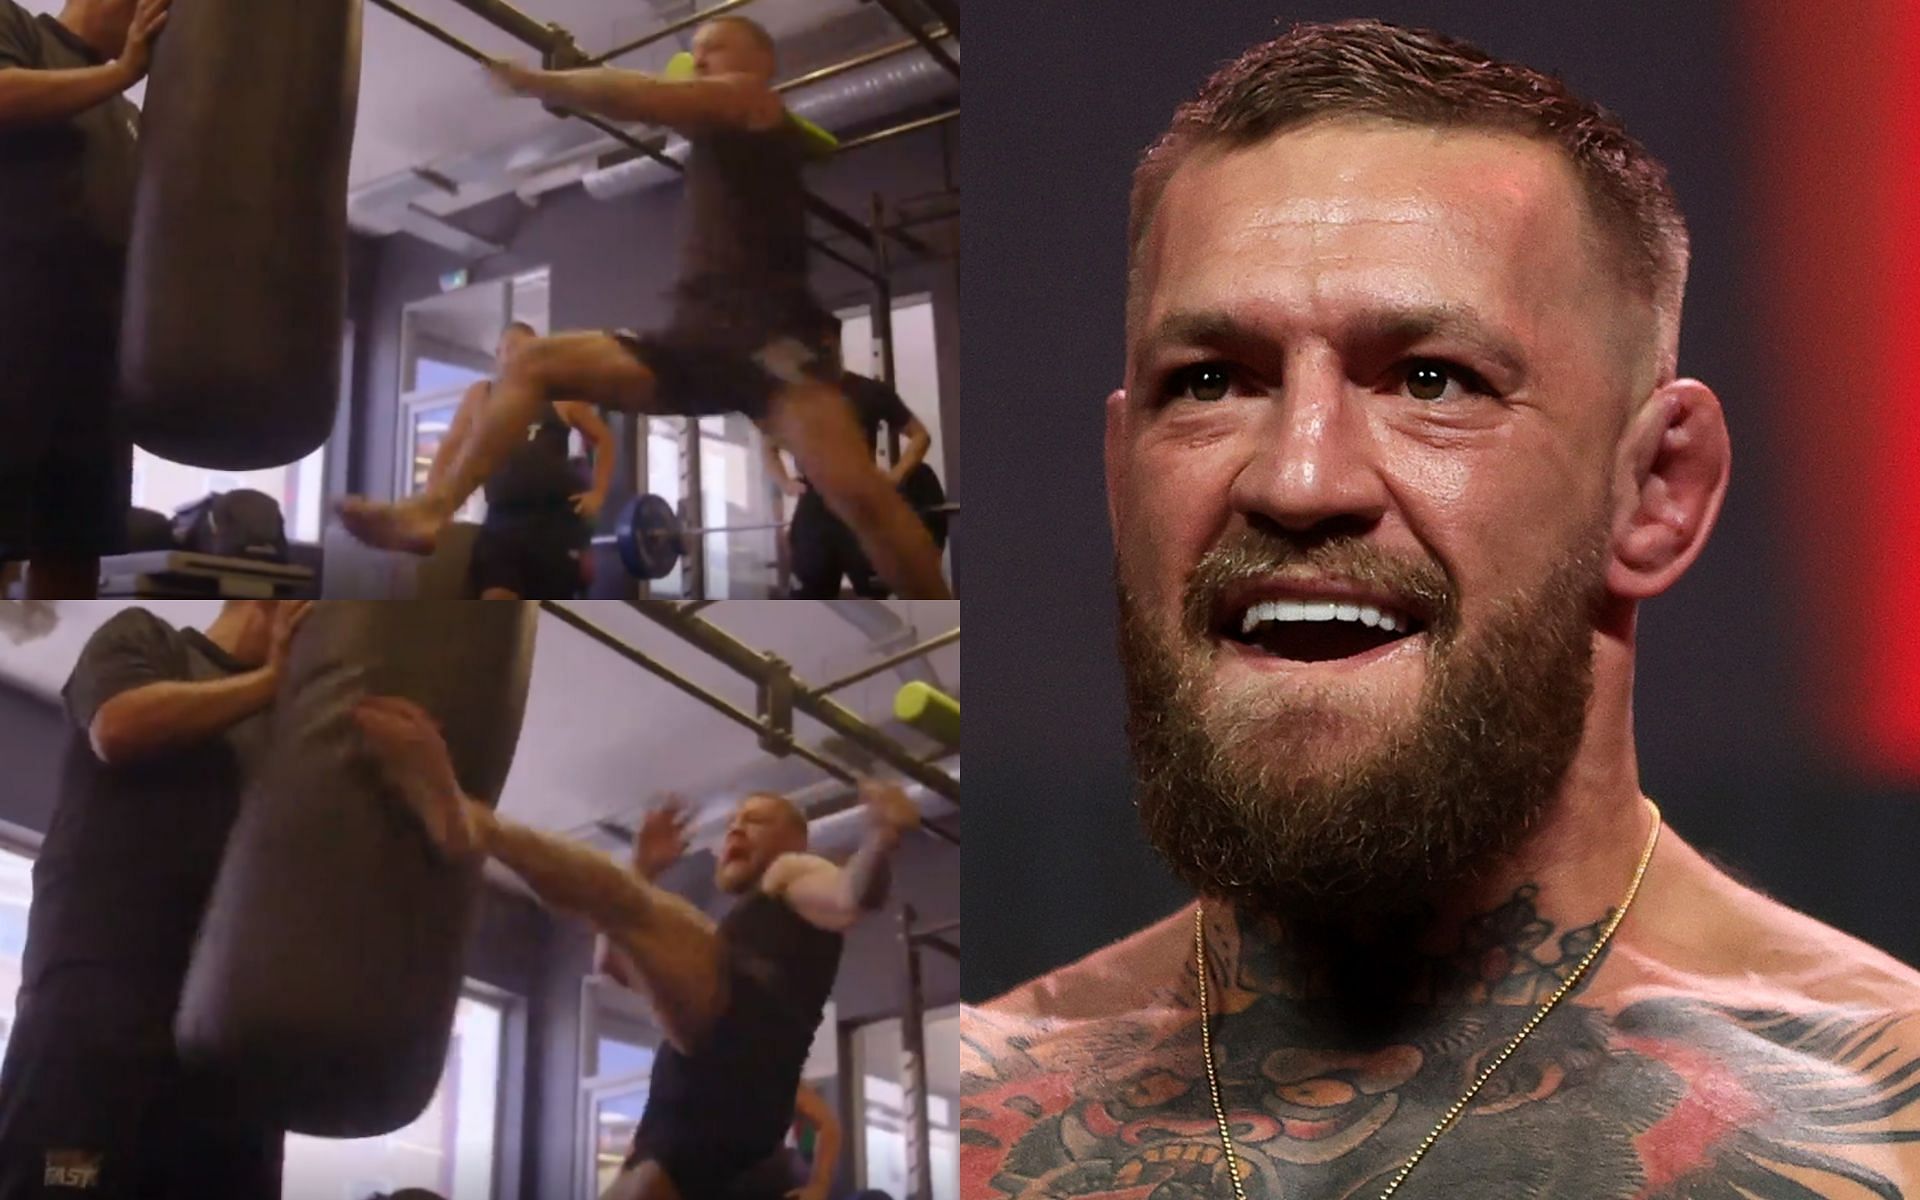 McGregor&#039;s kicking video (left, images courtesy of @thenotoriousmma Instagram); McGregor (right, image courtesy of Getty)